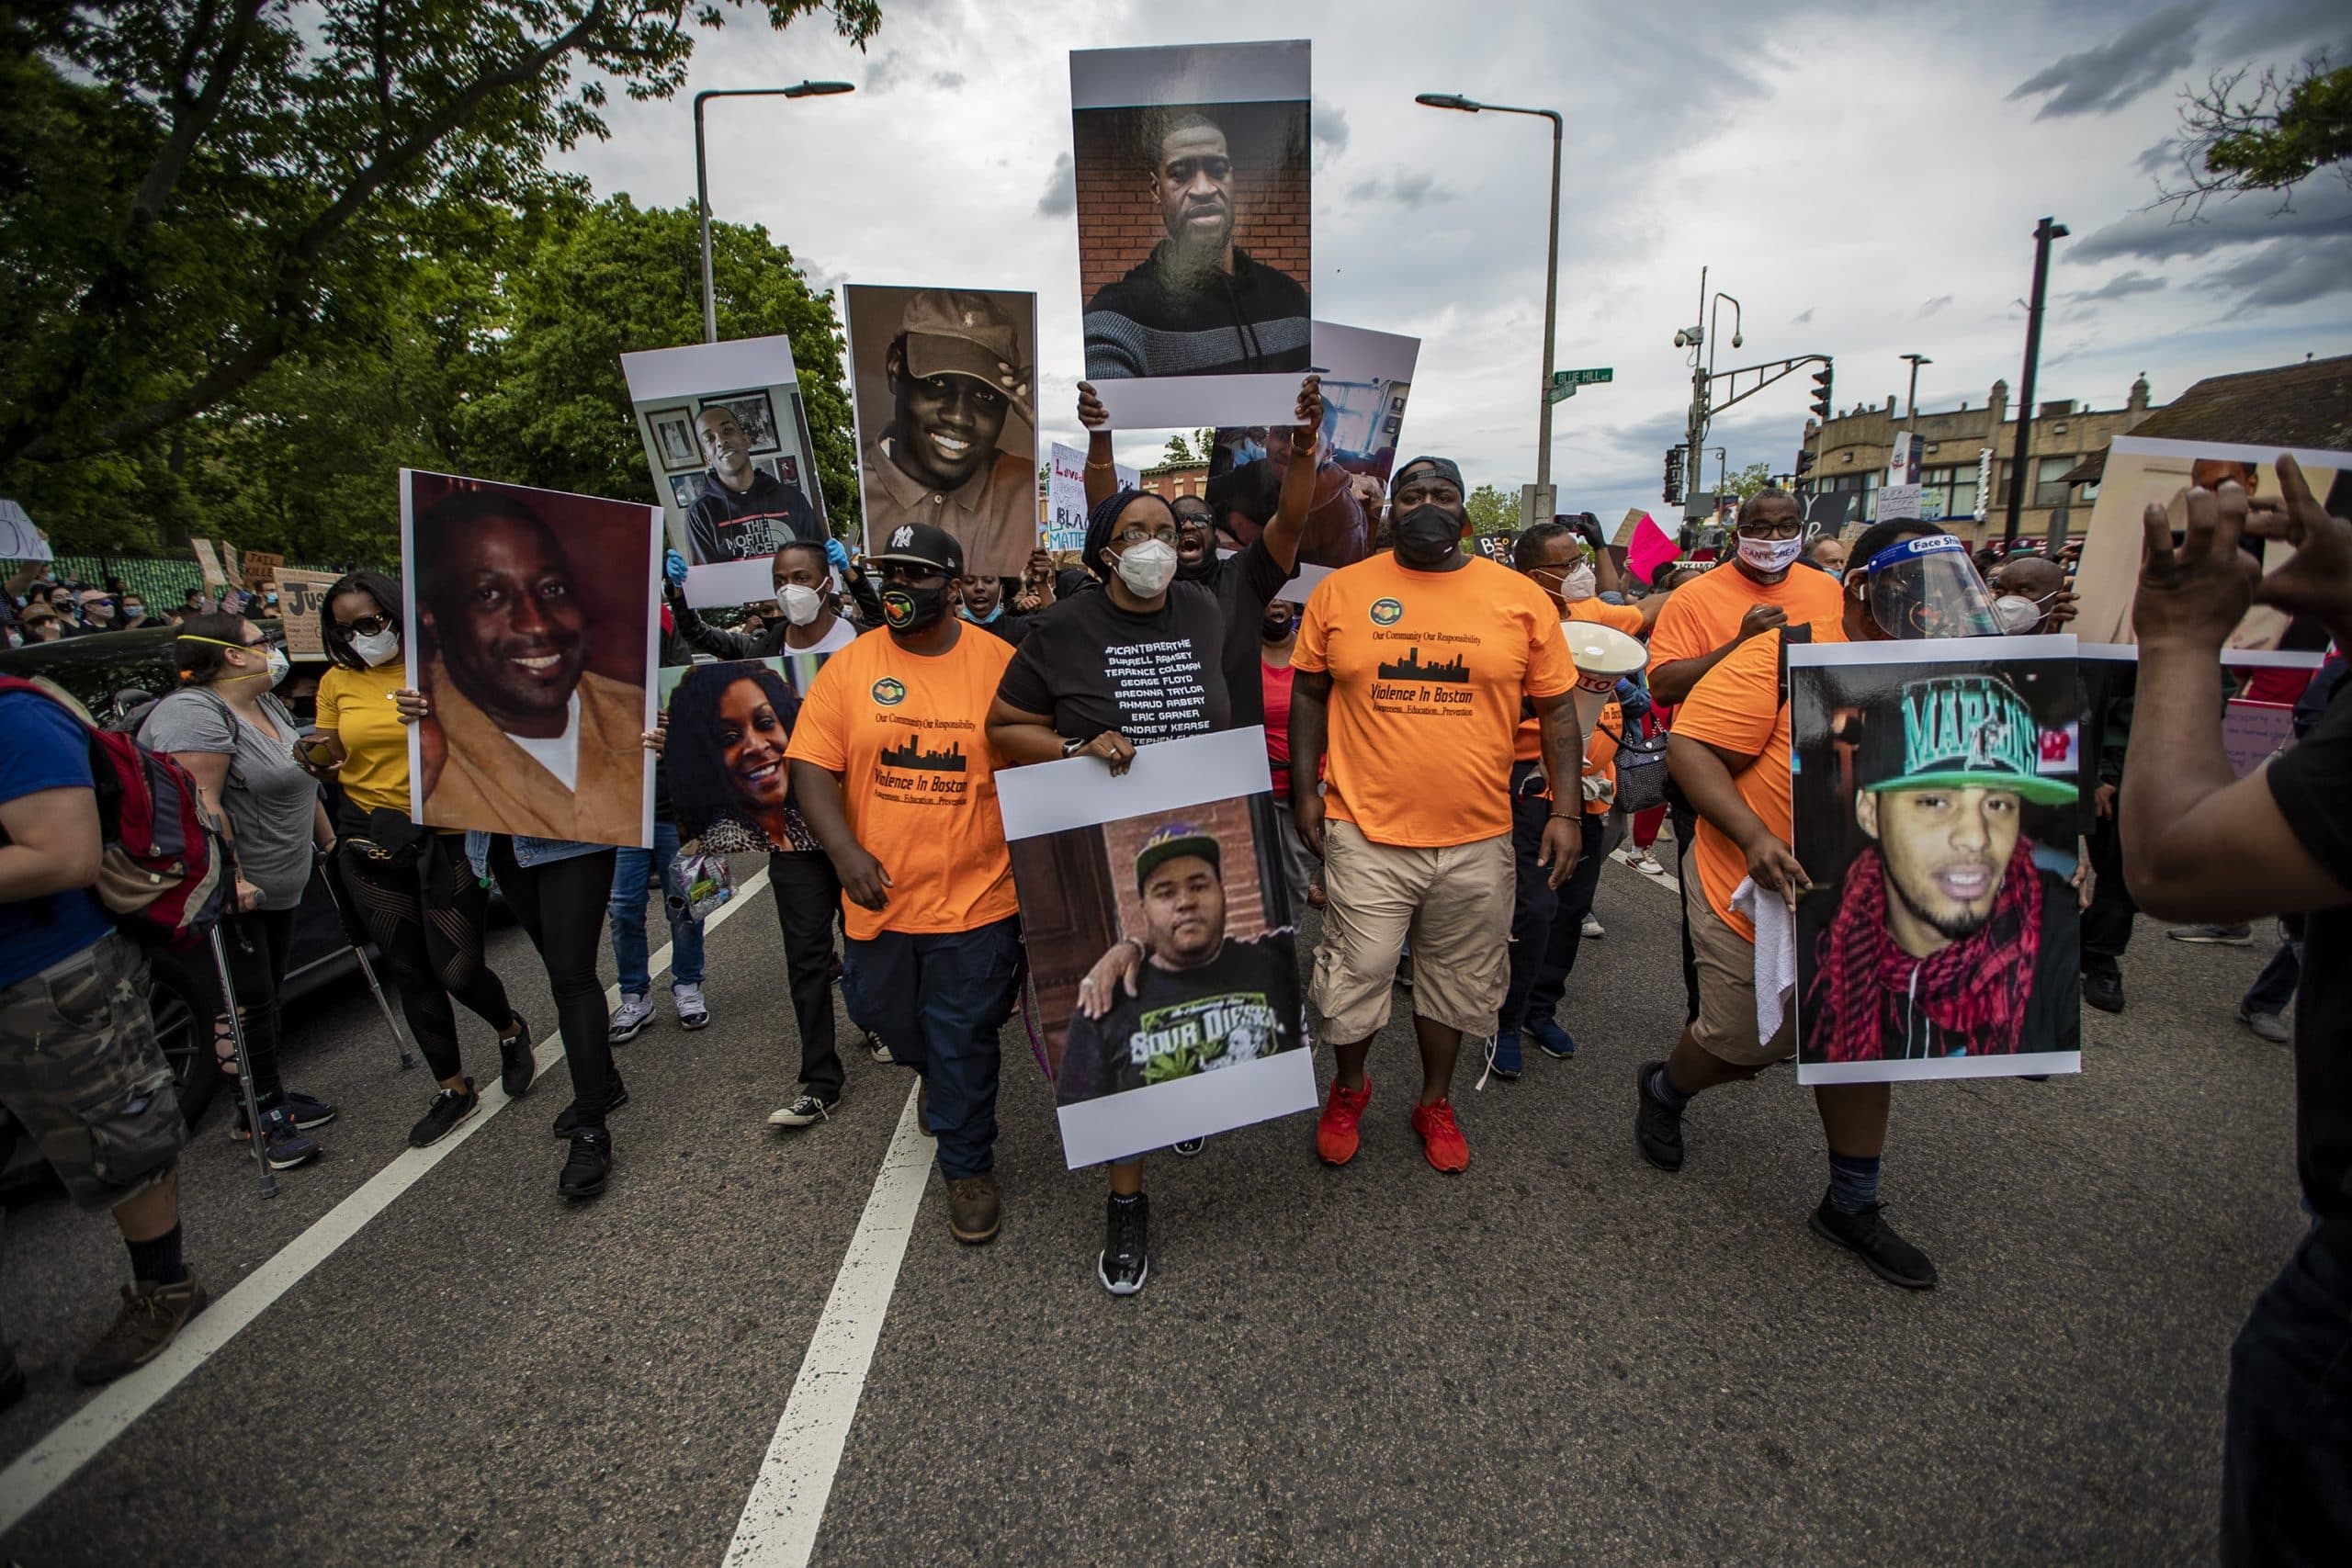 Monica Cannon Grant led the march down Franklin Park Road during the Black Lives Matter vigil in Roxbury on June 2, 2020. (Jesse Costa/WBUR)